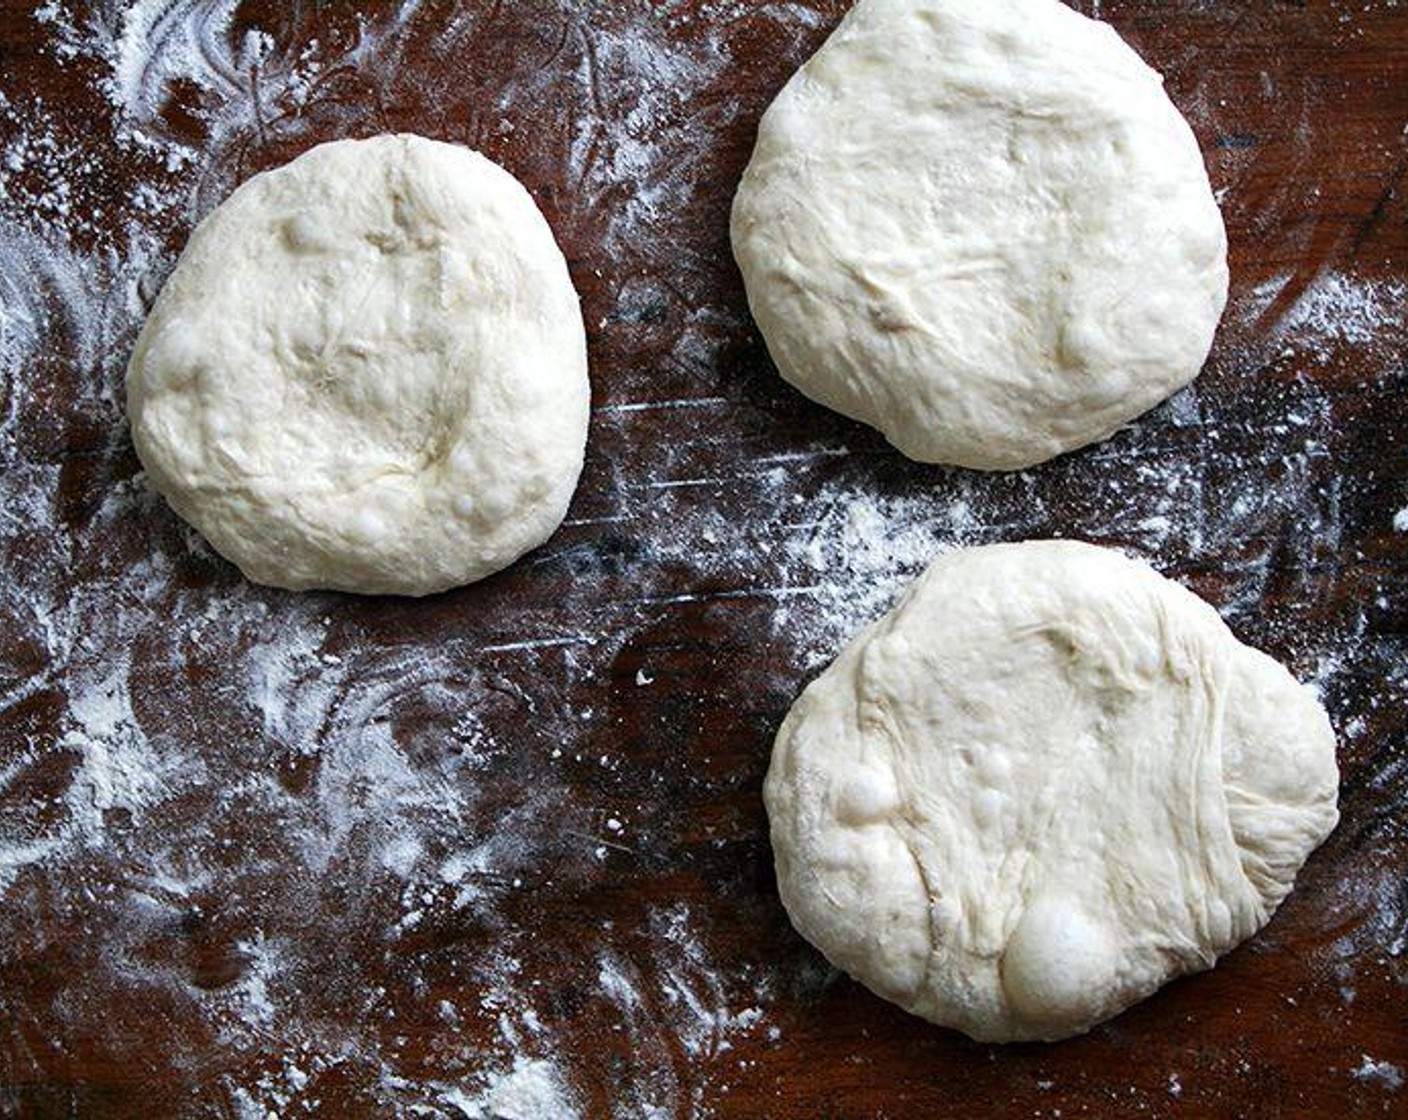 step 4 Transfer the dough to a floured work surface. Gently shape it into a rough ball. Divide into 6 equal portions. Working with 1 portion at a time, quickly shape into a ball. Dust dough with flour then set aside on a work surface or a floured baking sheet. Repeat with remaining portions.